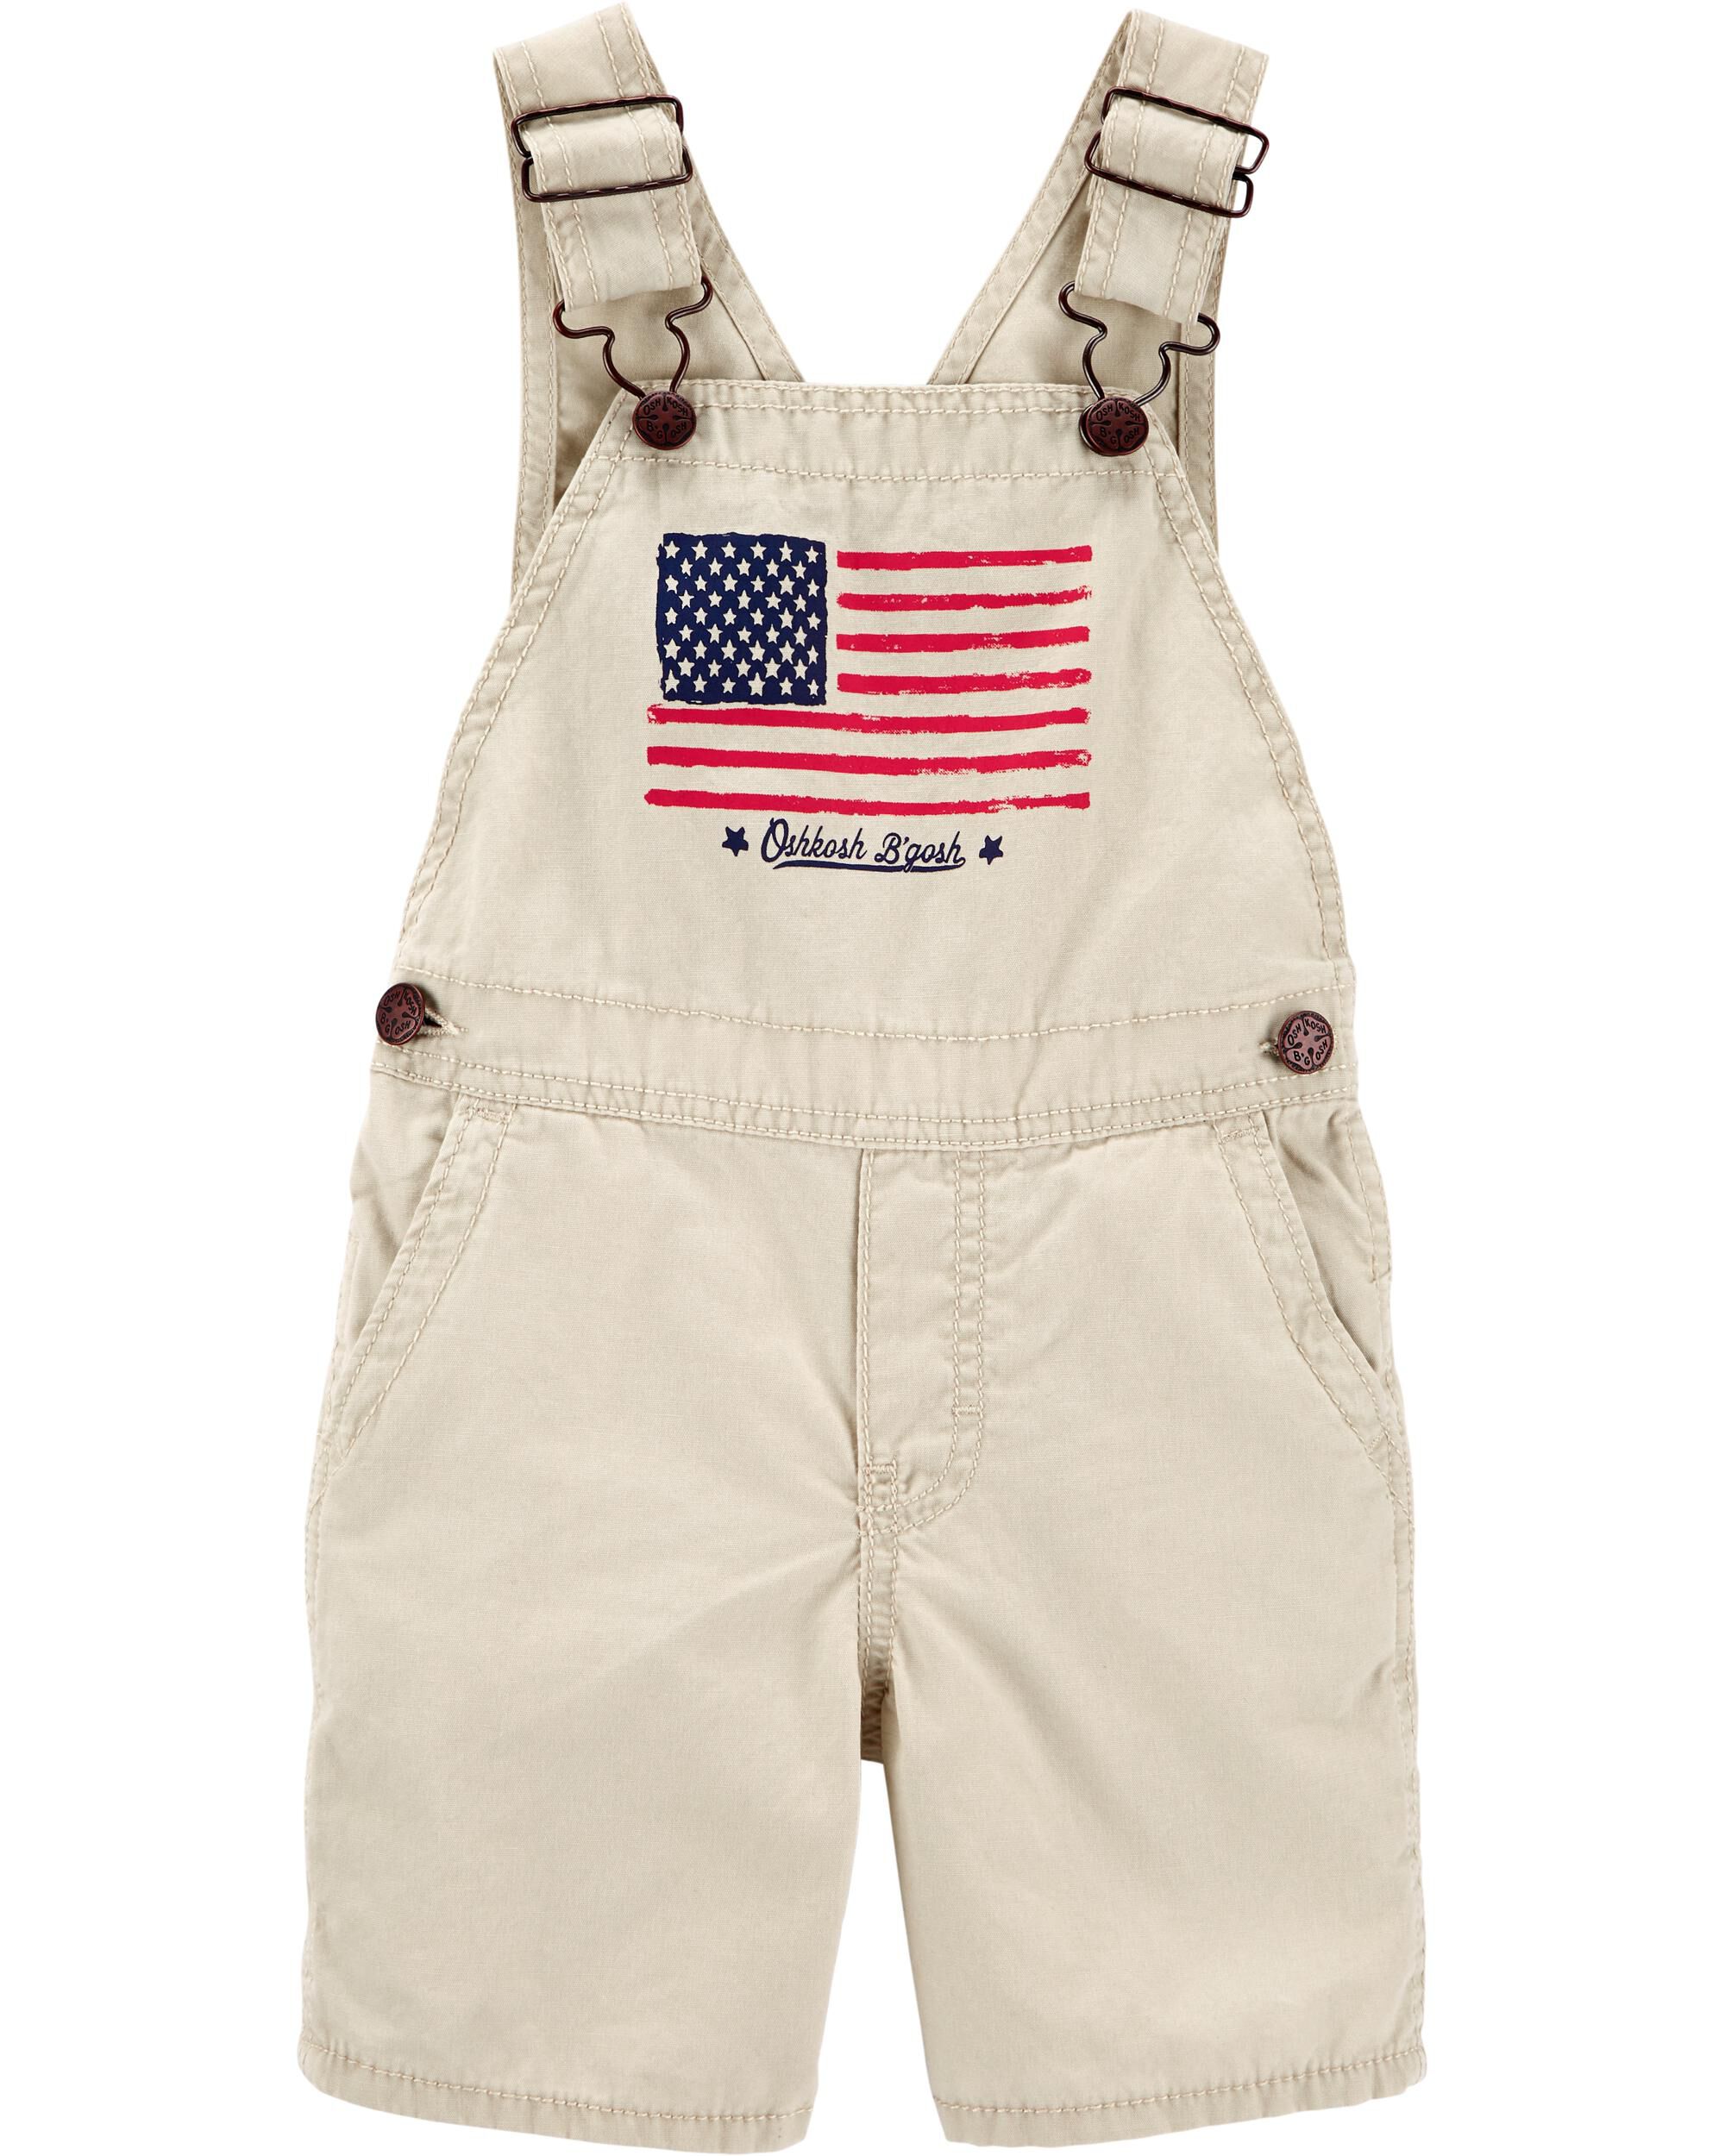 girls size 8 overalls